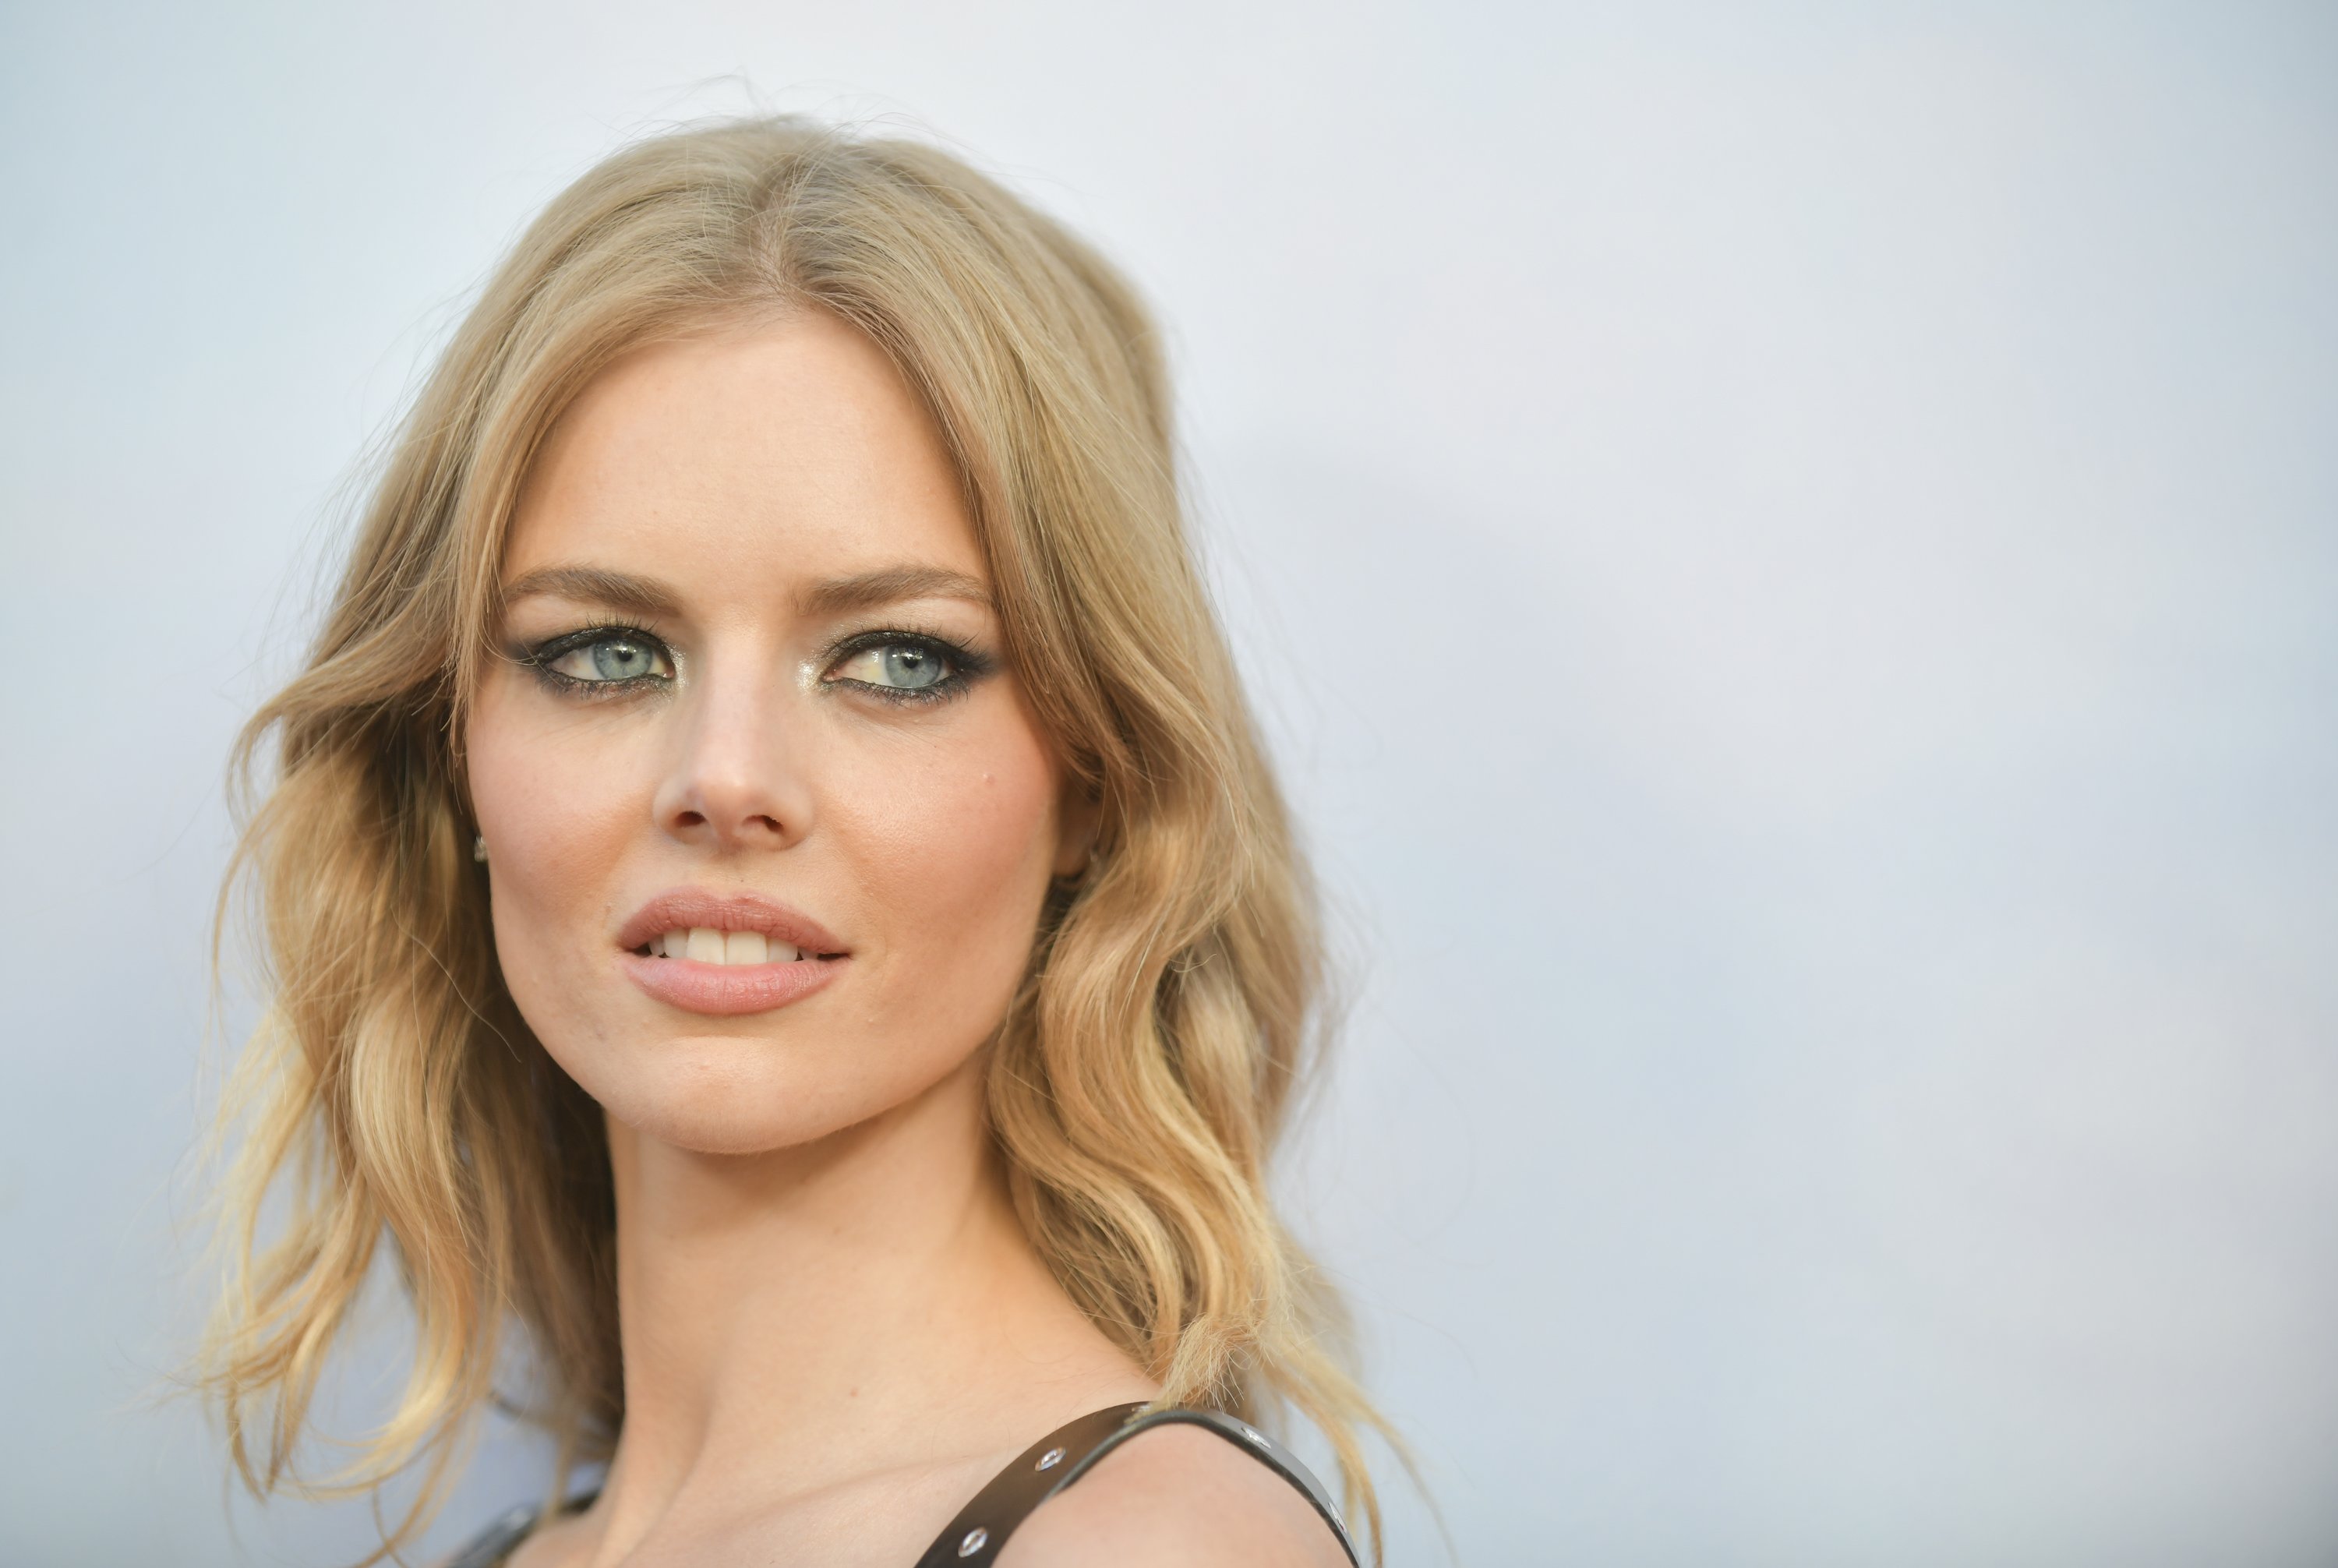 Samara Weaving attends Hulu's "The Valet" global premiere at The Montalban, on May 11, 2022 in Hollywood, California. | Source: Getty Images